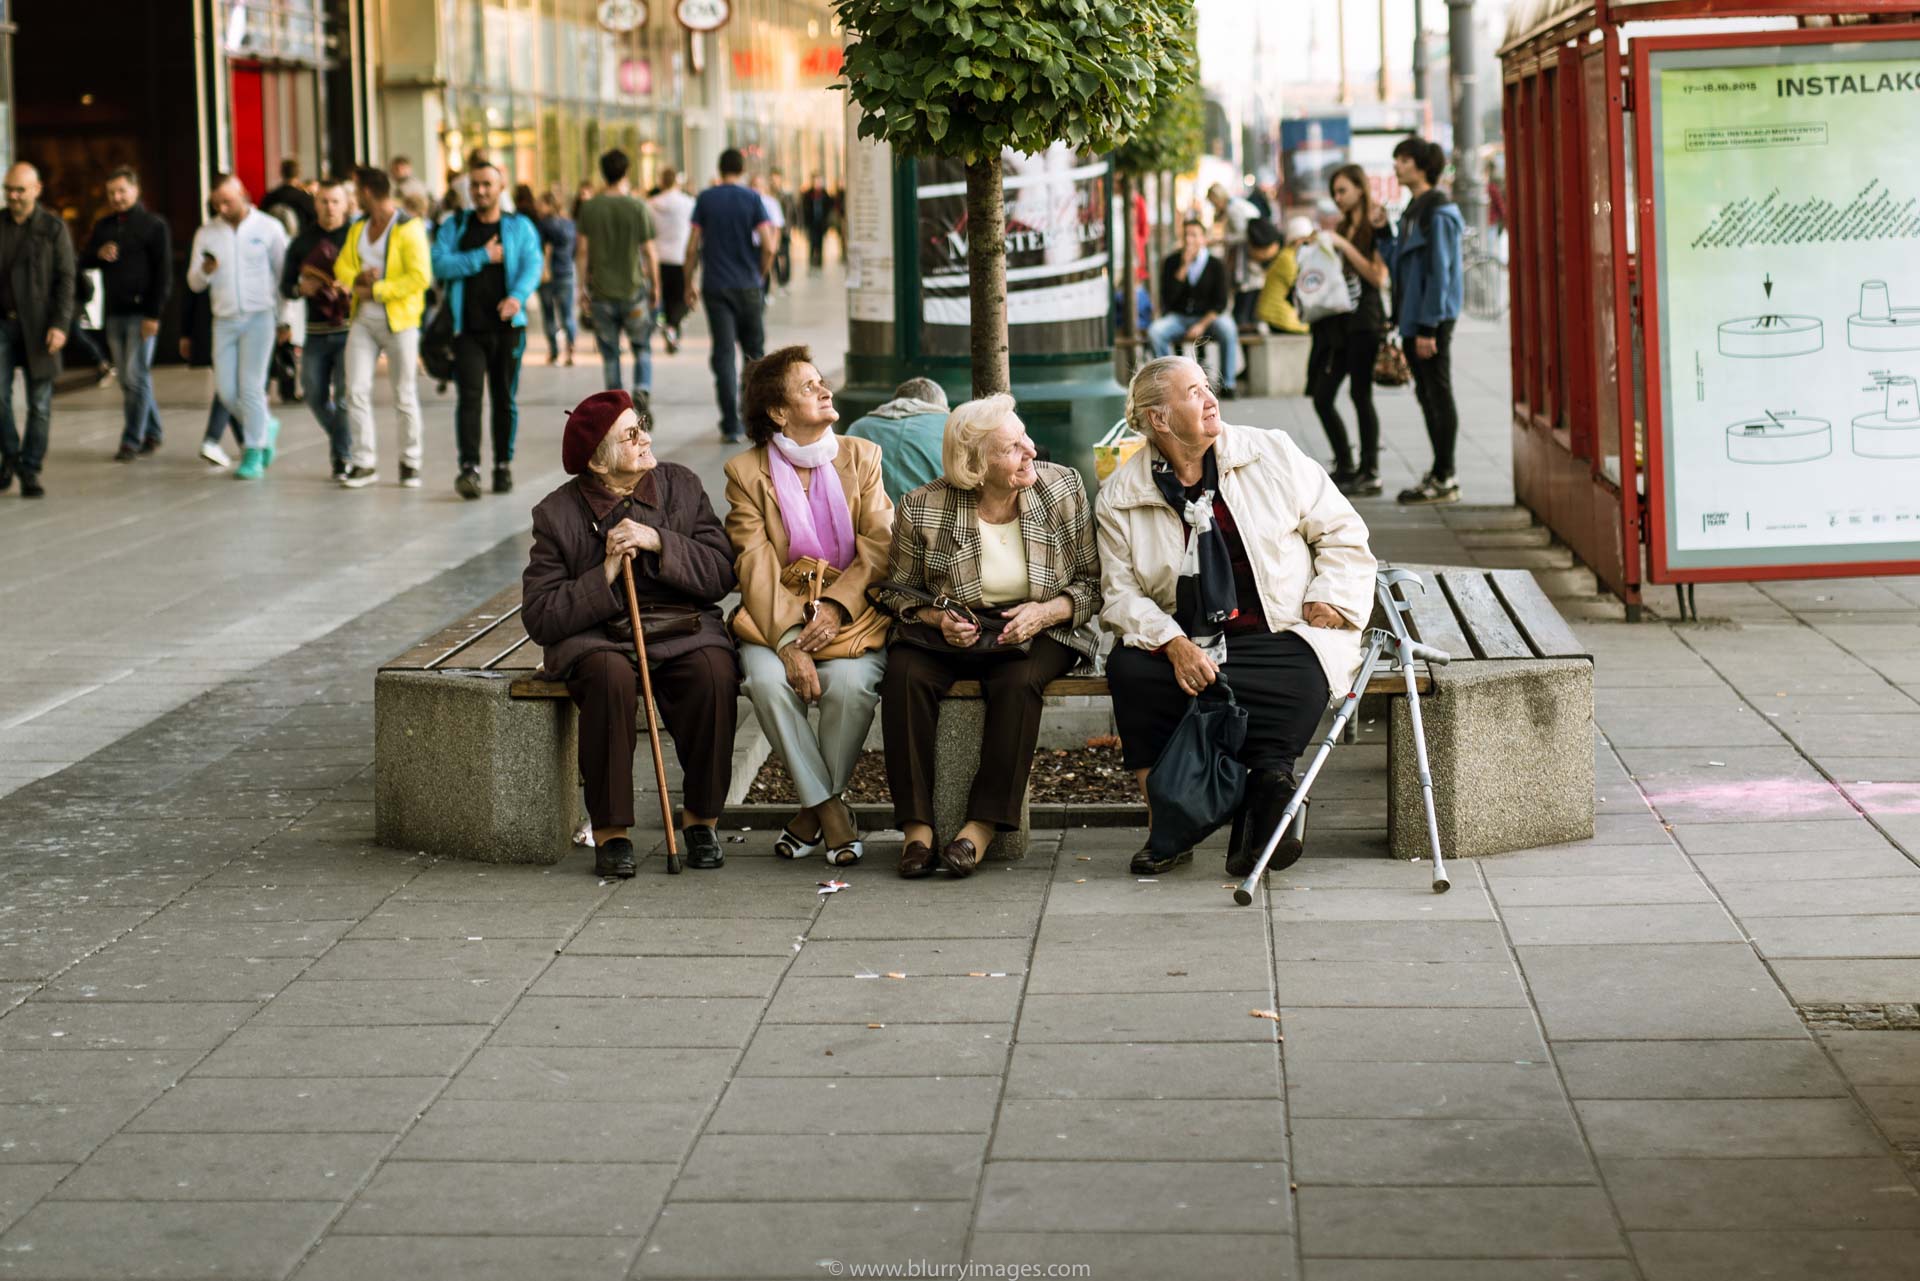 bench, four women, old woman, outdoors, 2015, bus station, pavement, blond hair, brown hat, pink scarf, white jacket, brown jacket, grey jacket, brown jacket,